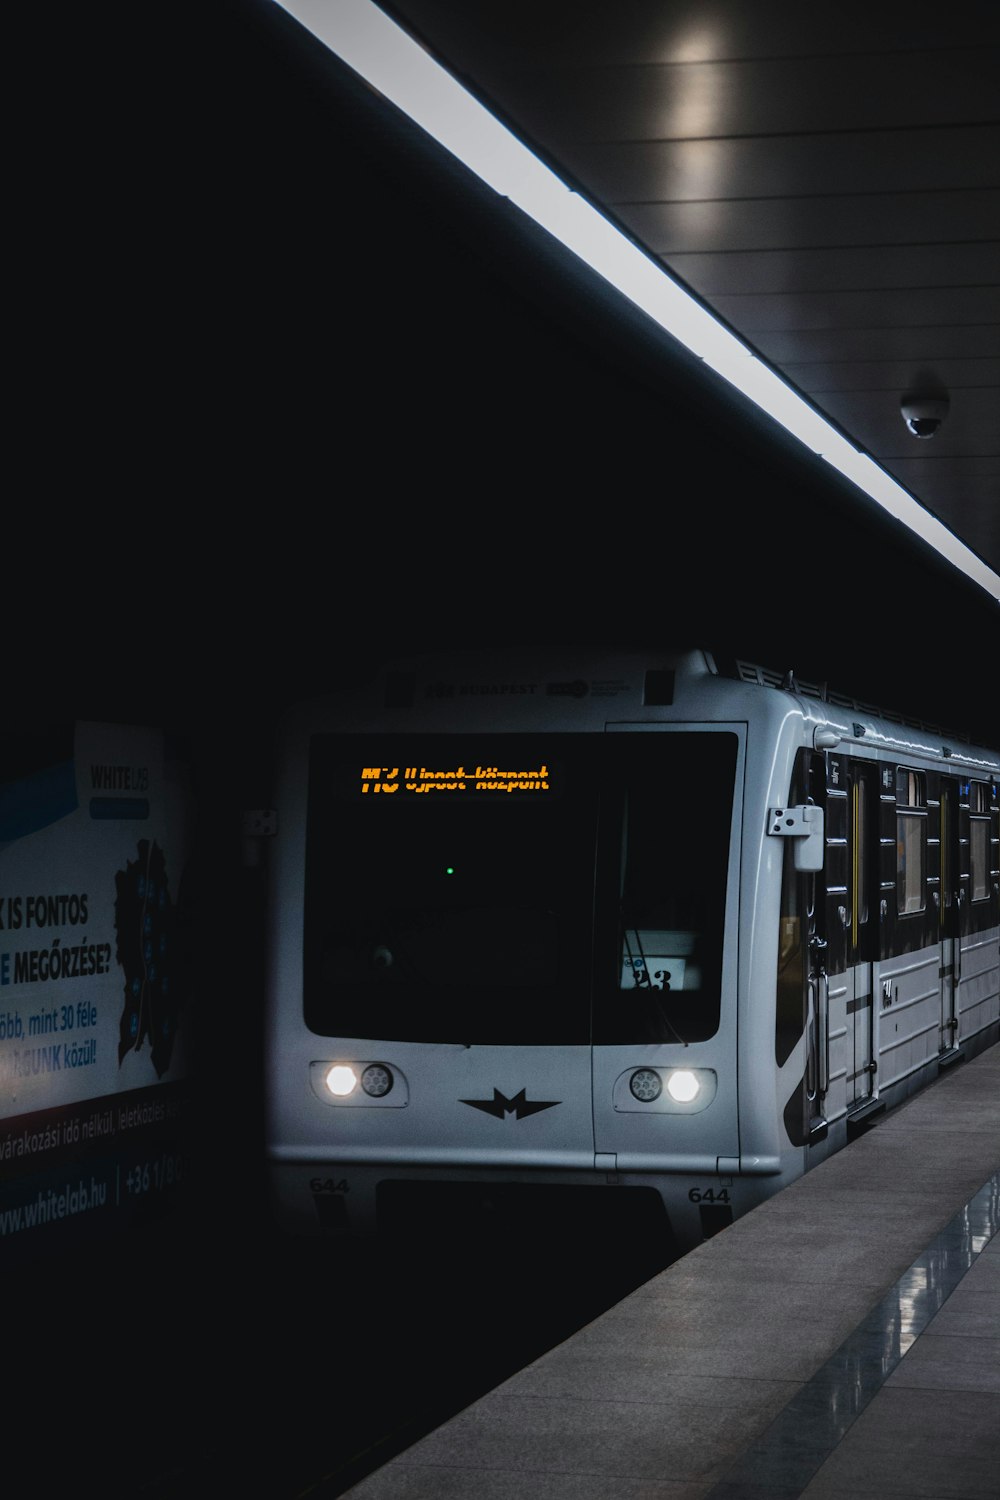 a subway train pulling into a train station